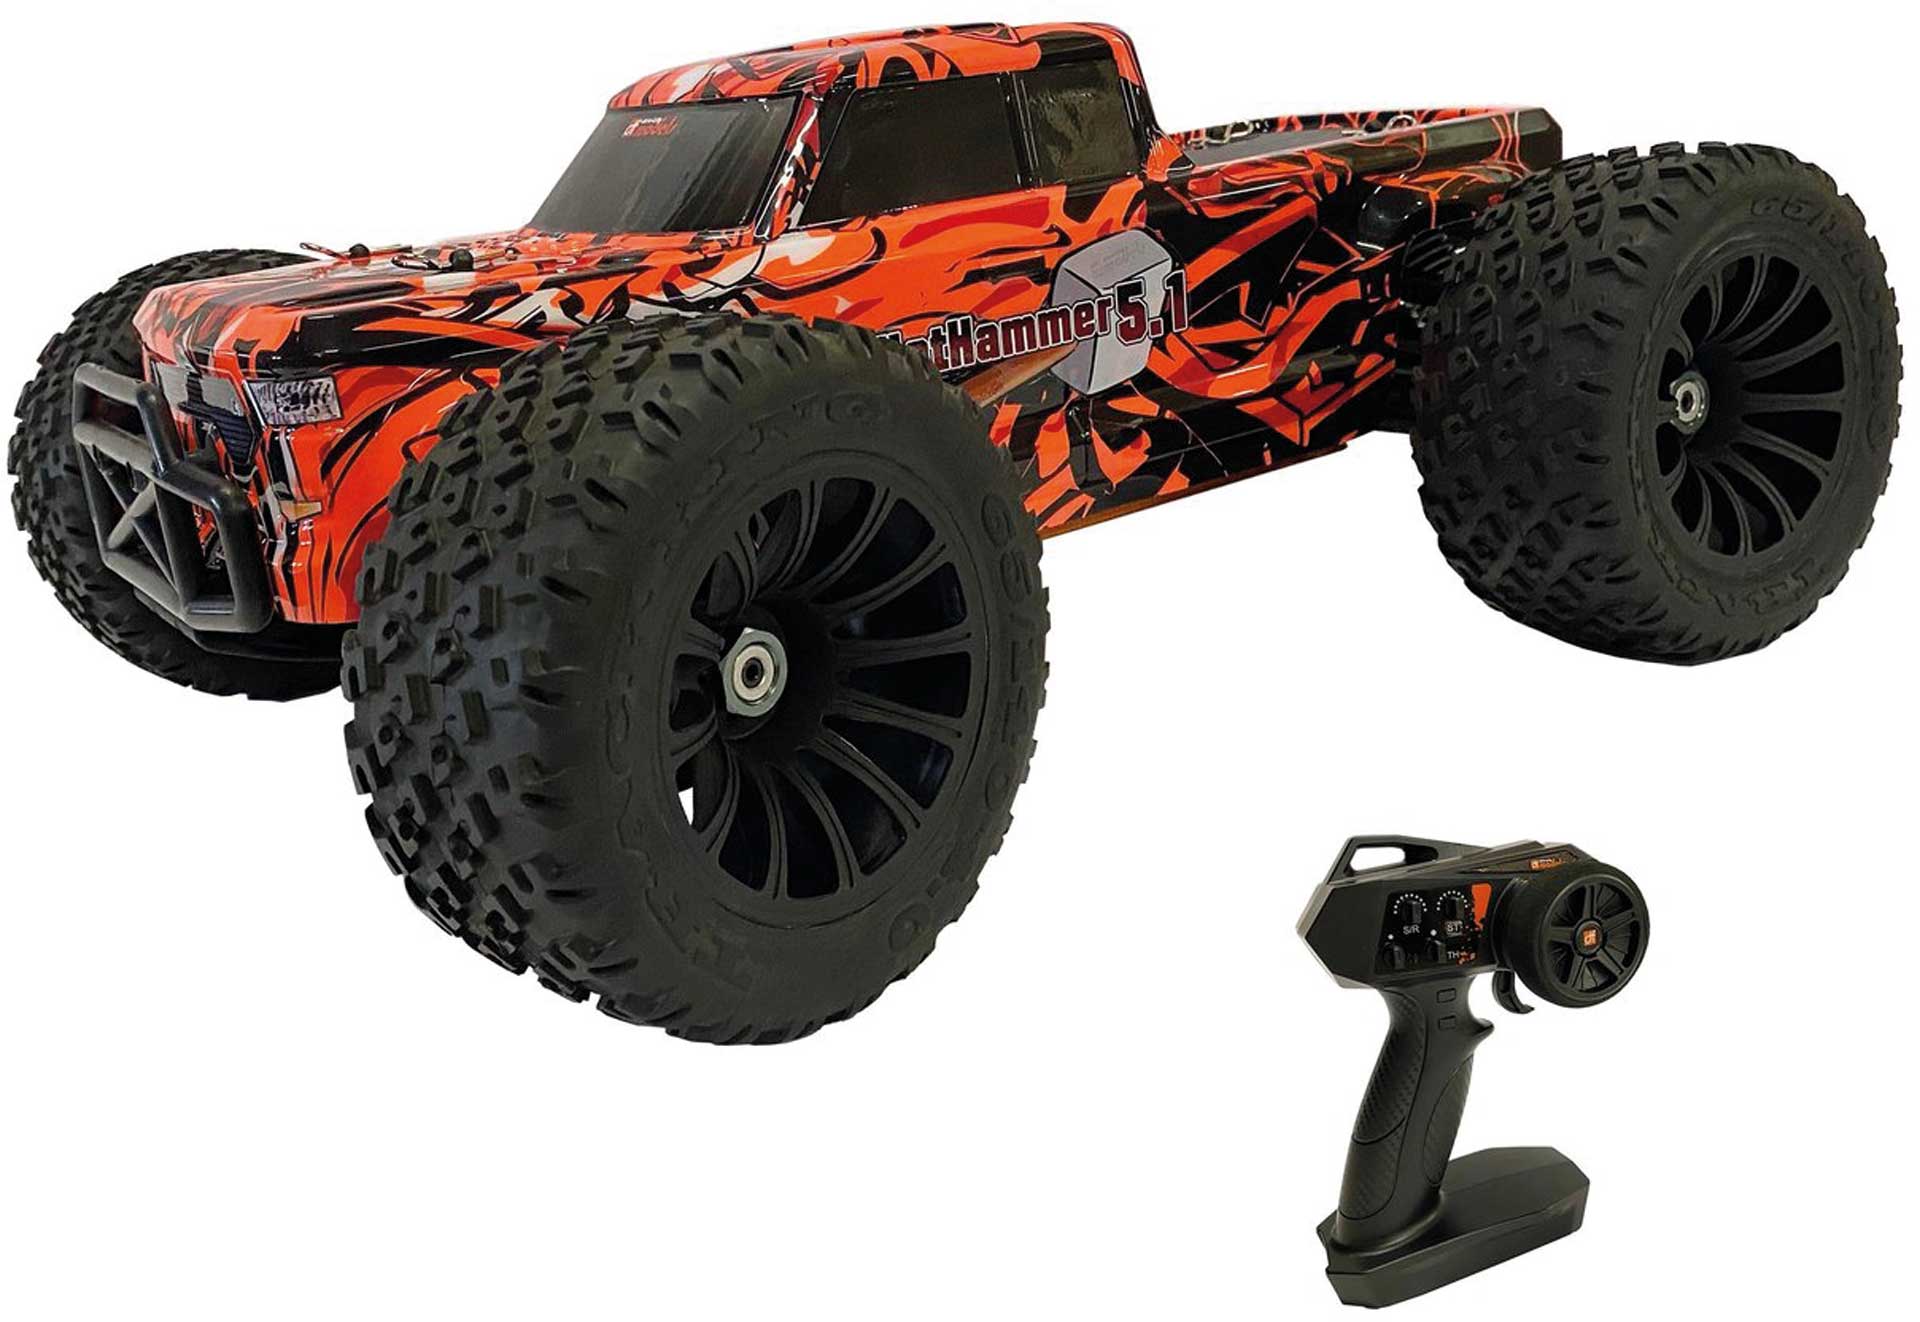 DRIVE & FLY MODELS HotHammer 5.1 COMPETITION Truck BL - brushless ARTR